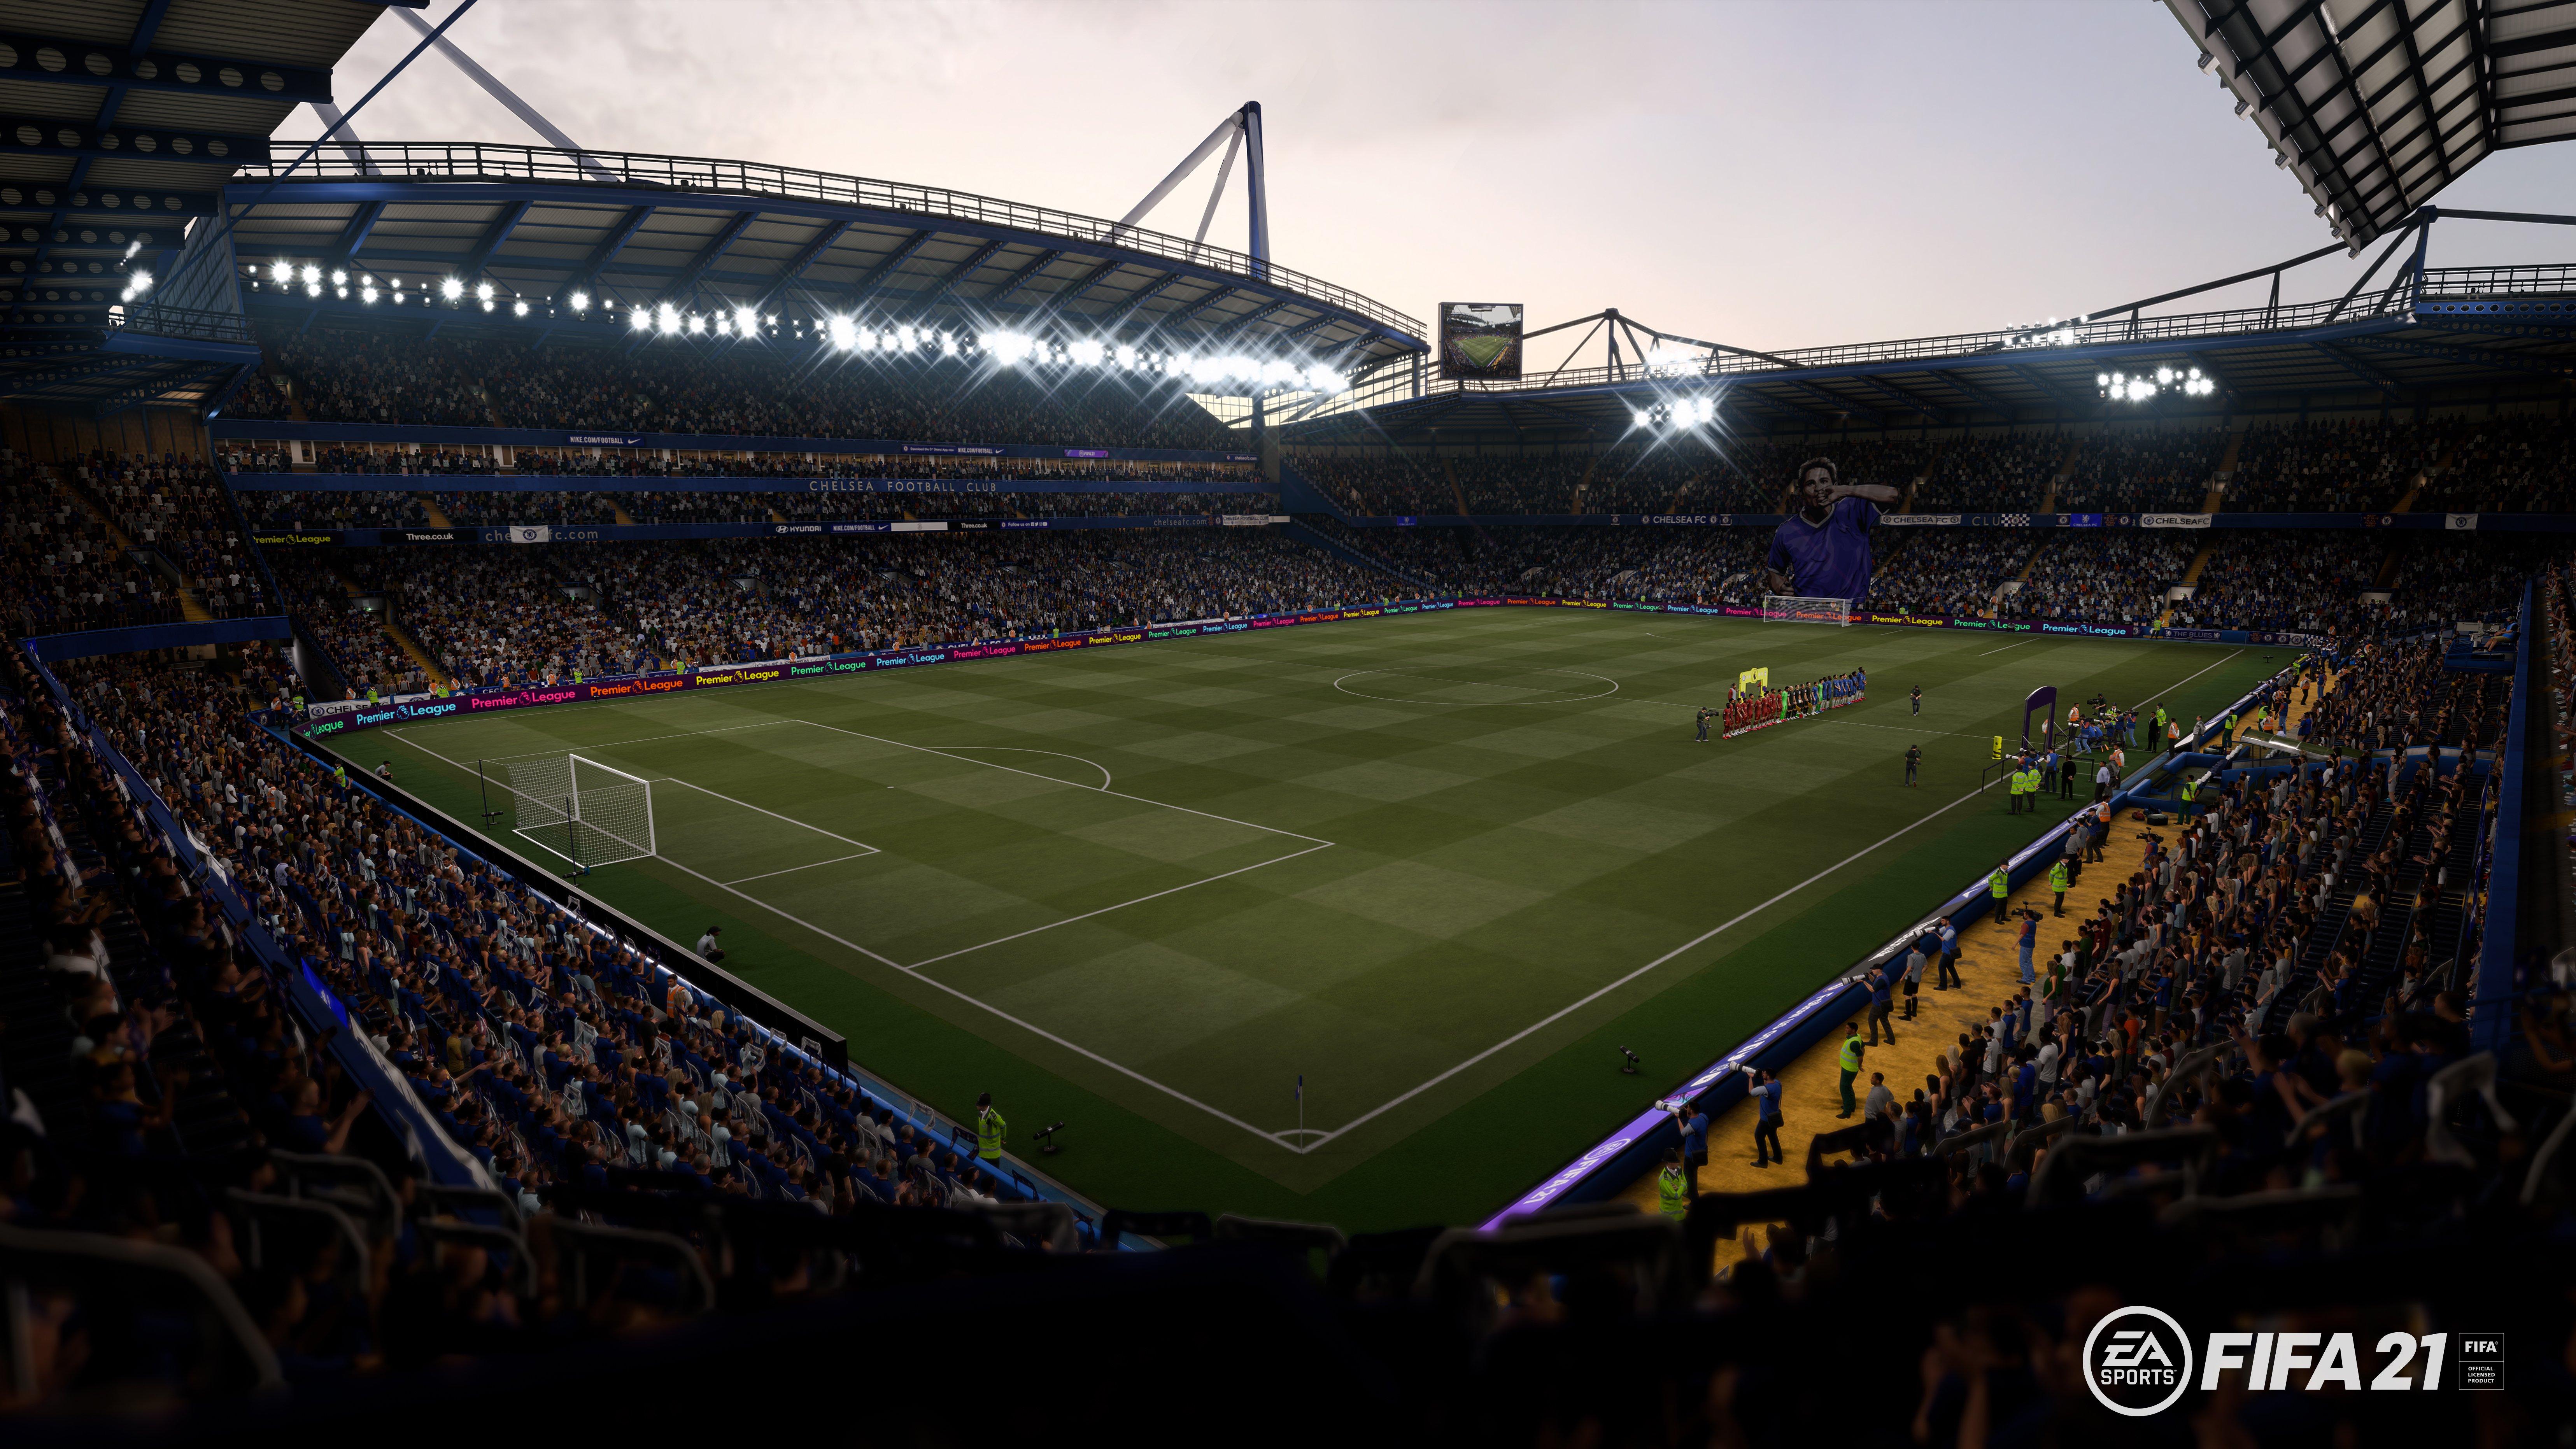 FIFA 21 to launch for PC, Xbox One, PS4 on 9 October; starting at ₹3,999